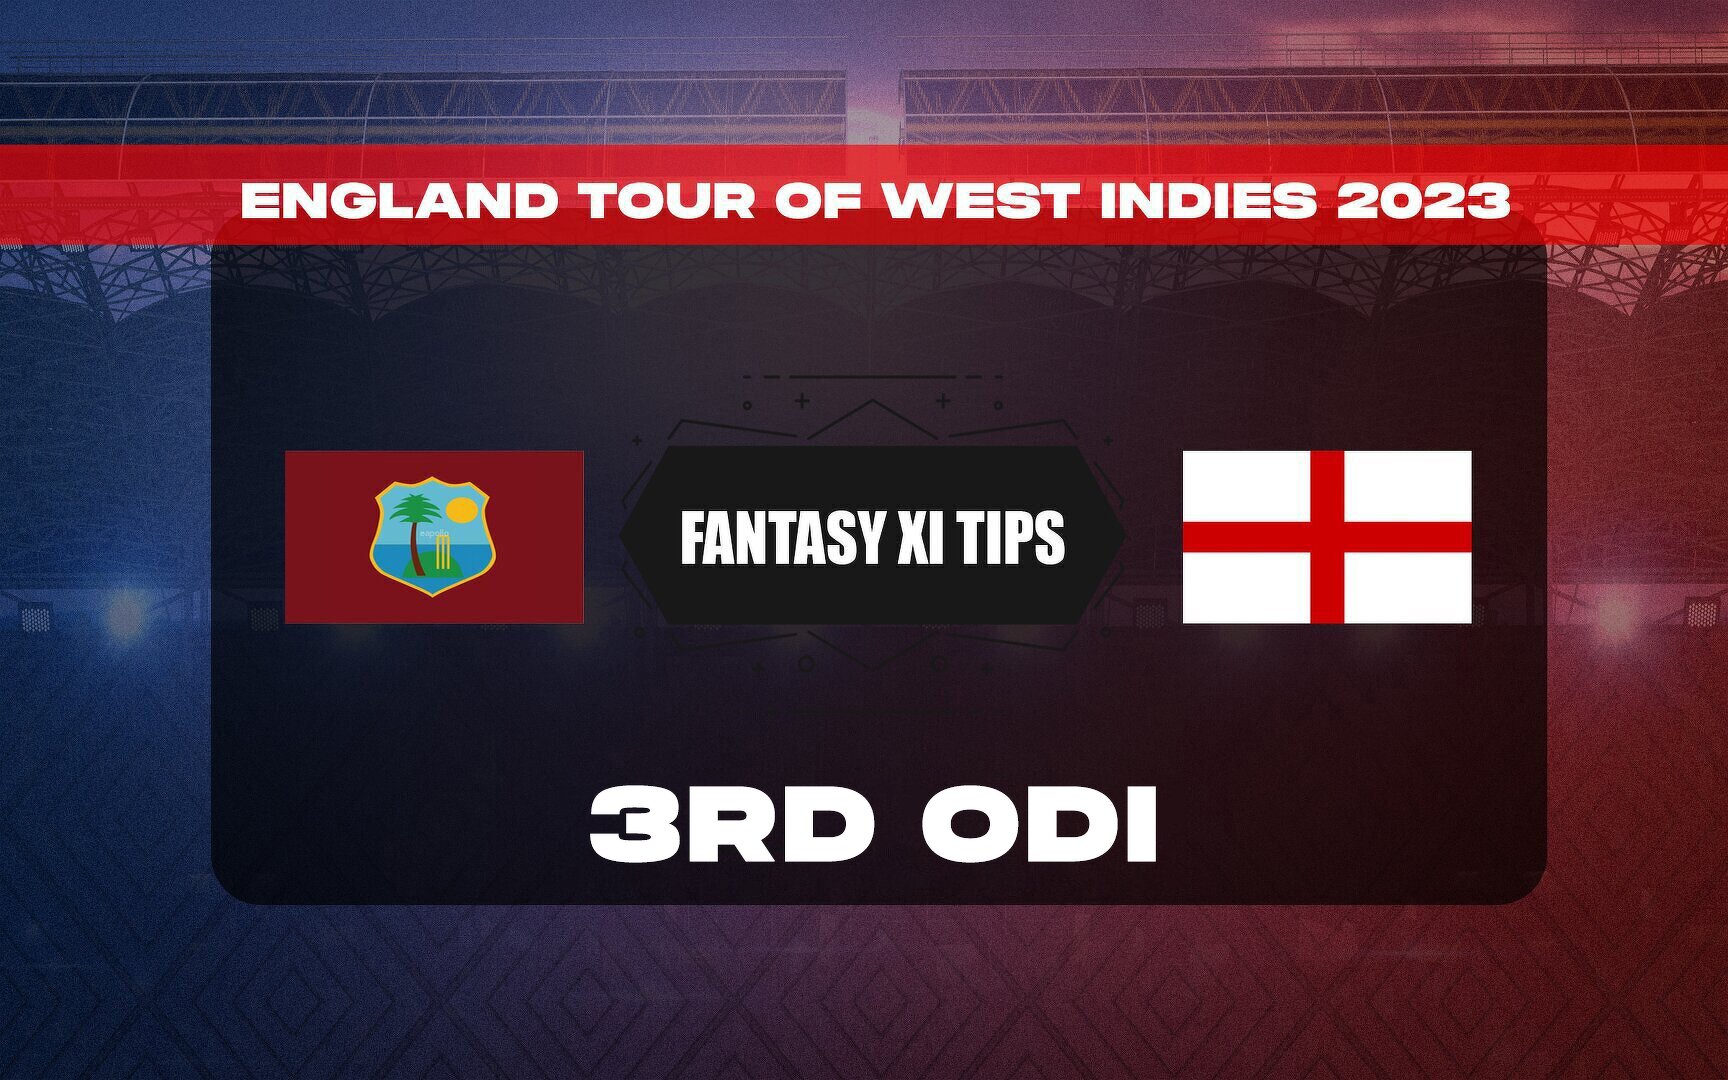 WI vs ENG Dream11 Prediction, Dream11 Playing XI, Today 3rd ODI, England  tour of West Indies 2023